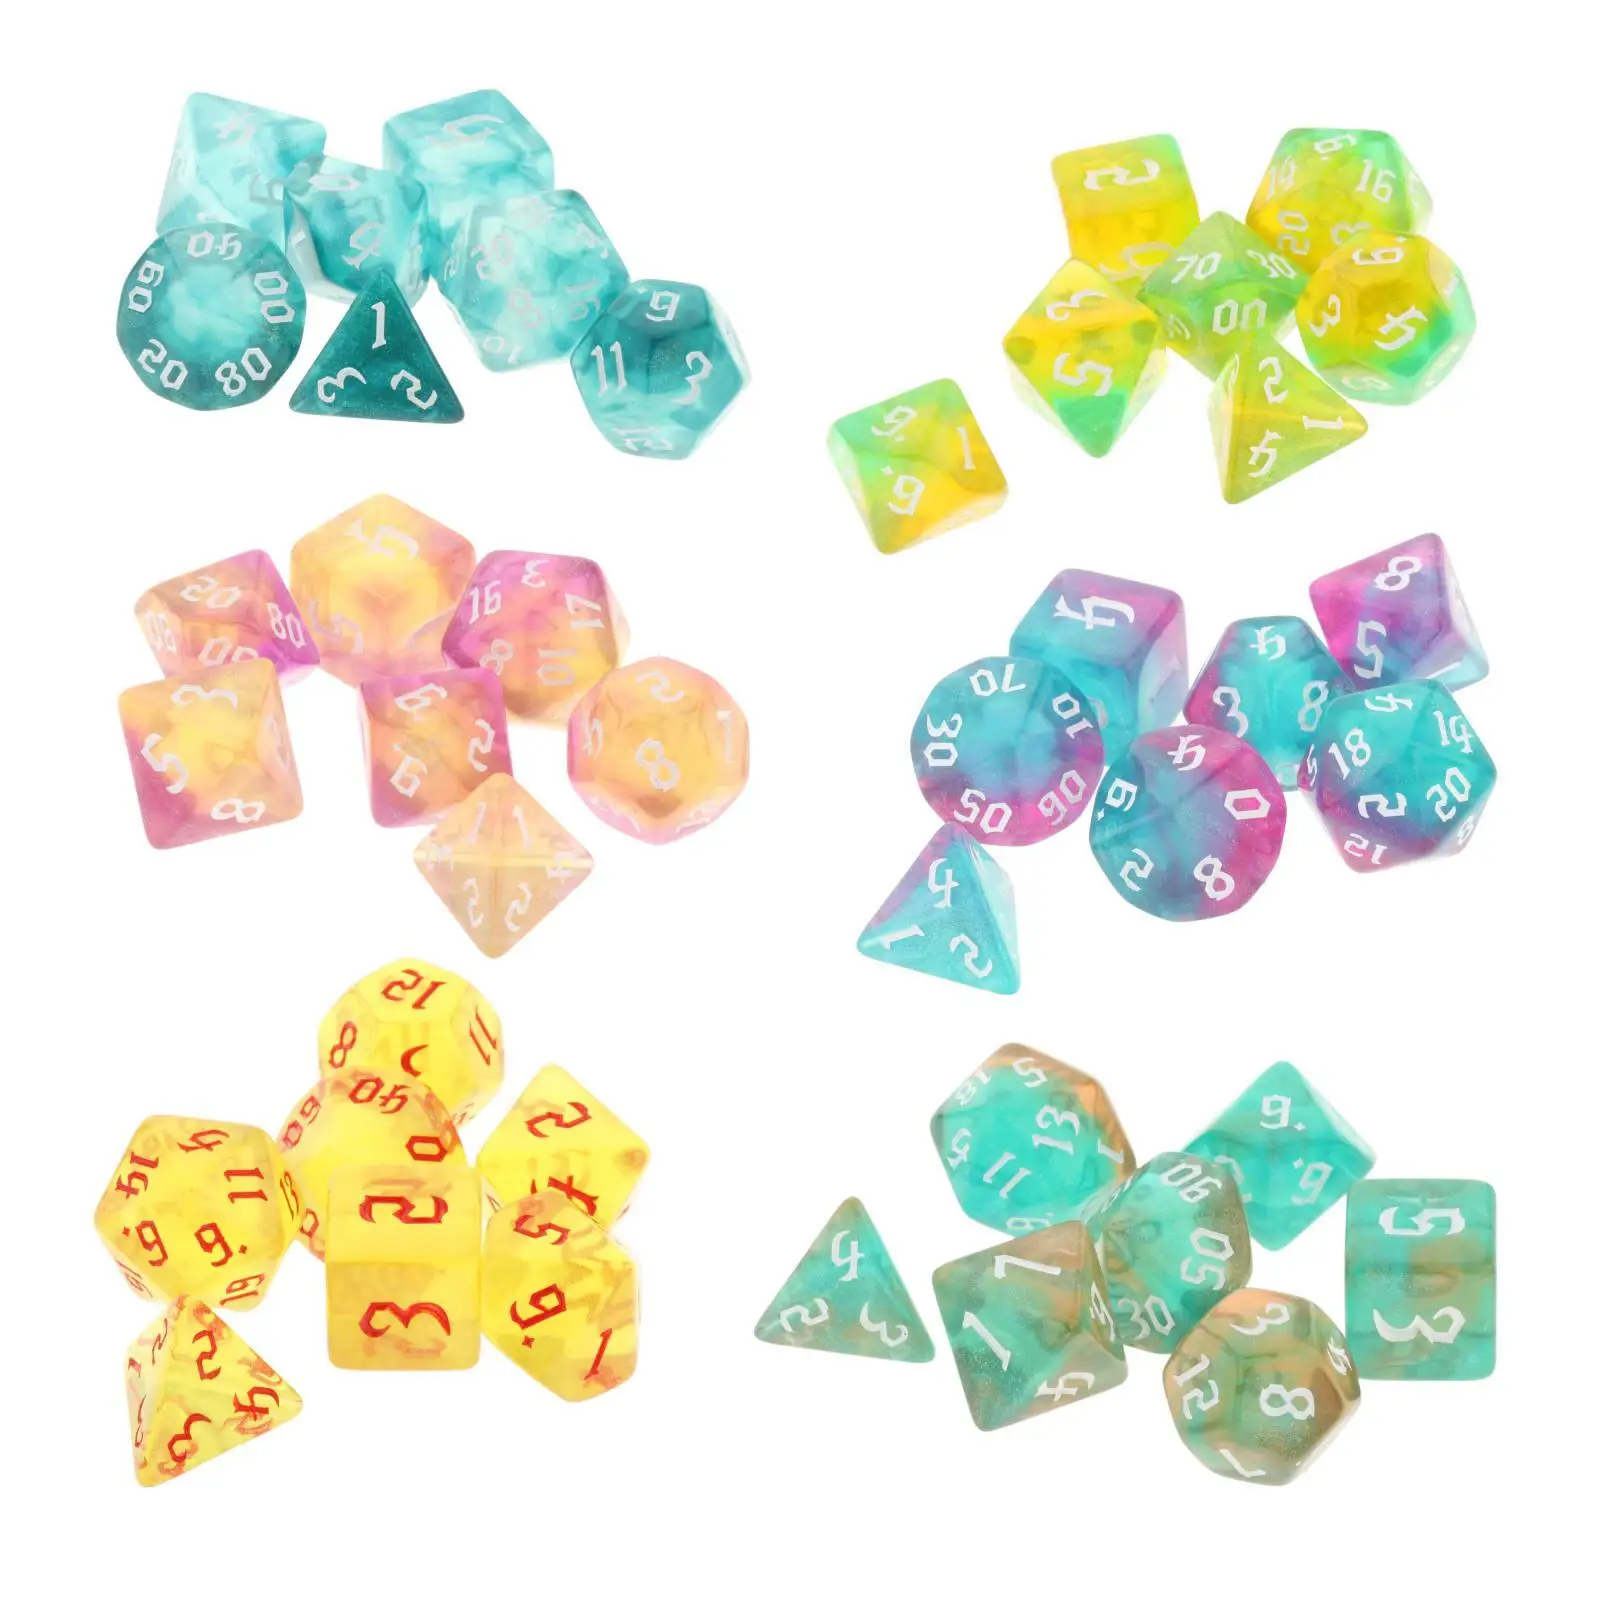 7 Pieces Polyhedral Dice Set Educational Toys Party Supplies Table Games Digital Dice